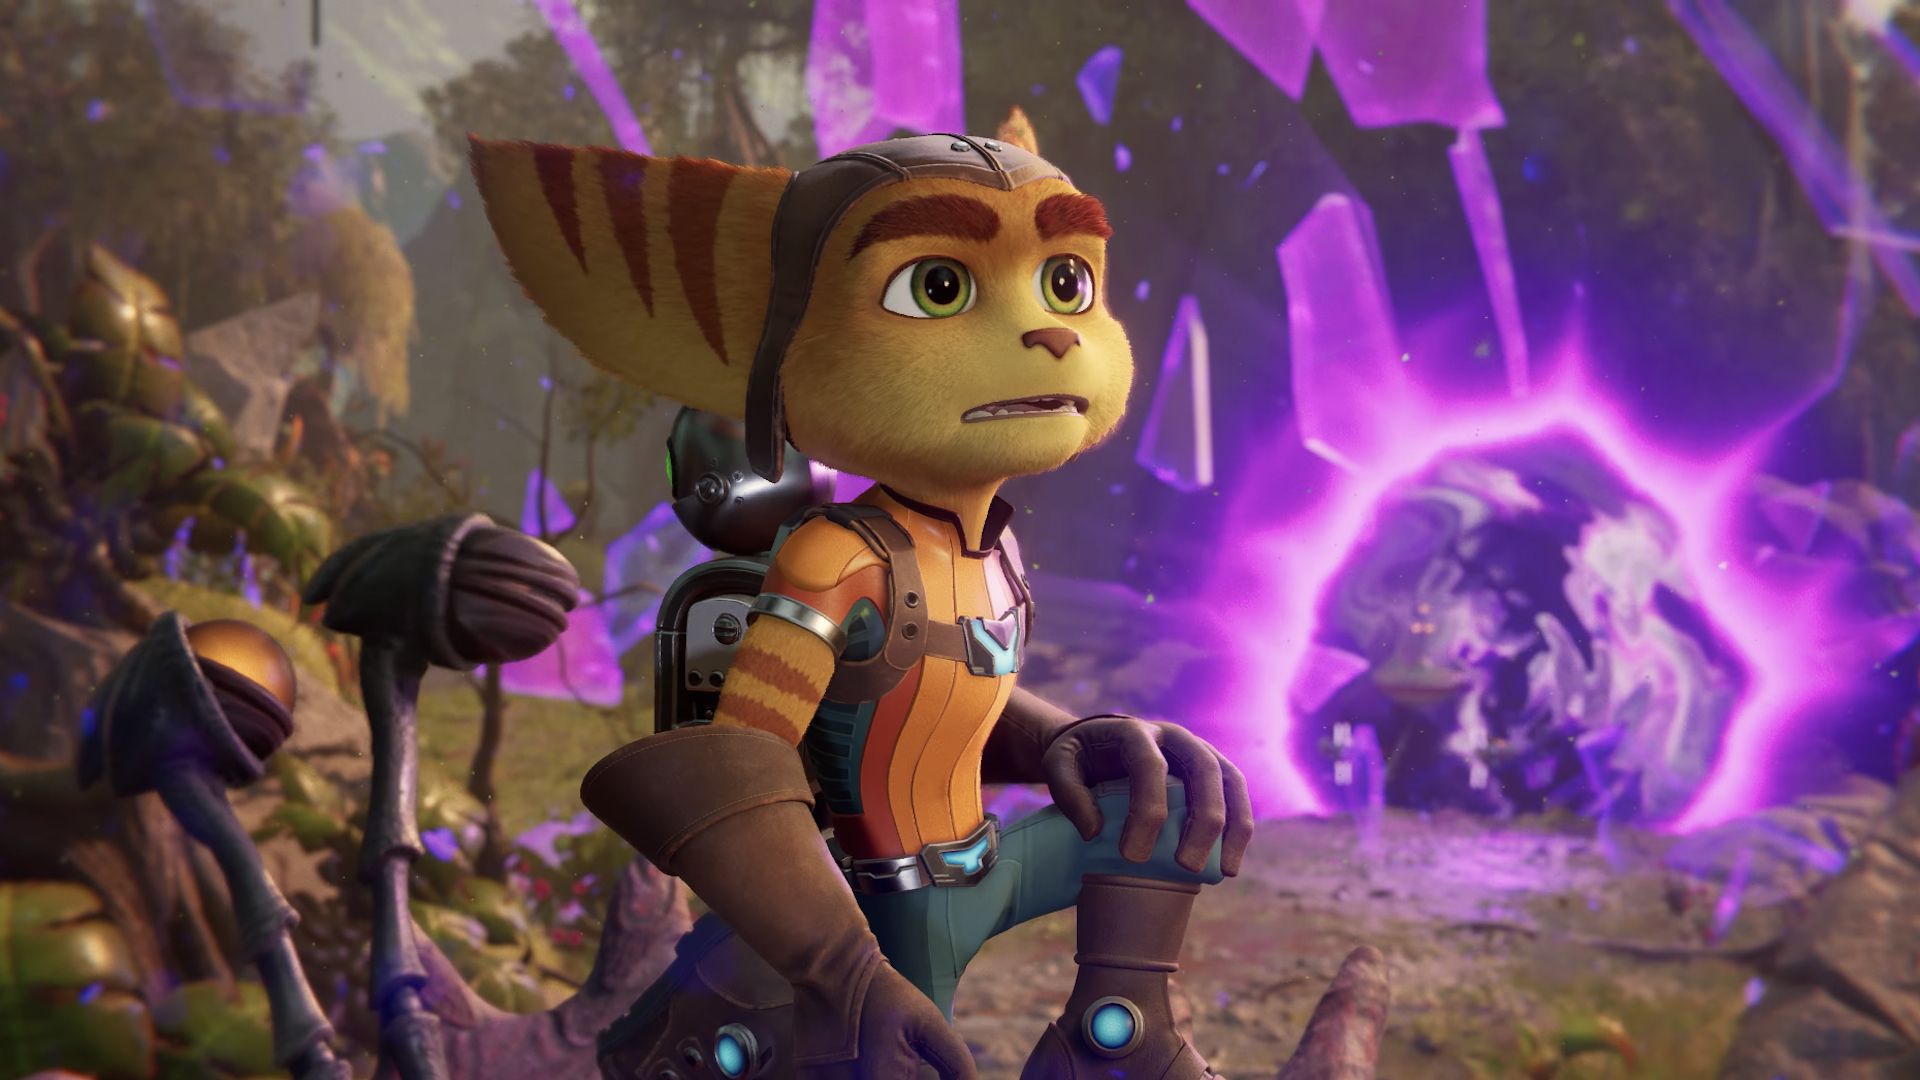 Ratchet And Clank: Rift Apart Includes Modes For 4k/30 Fps And 60 Fps At Lower Resolution